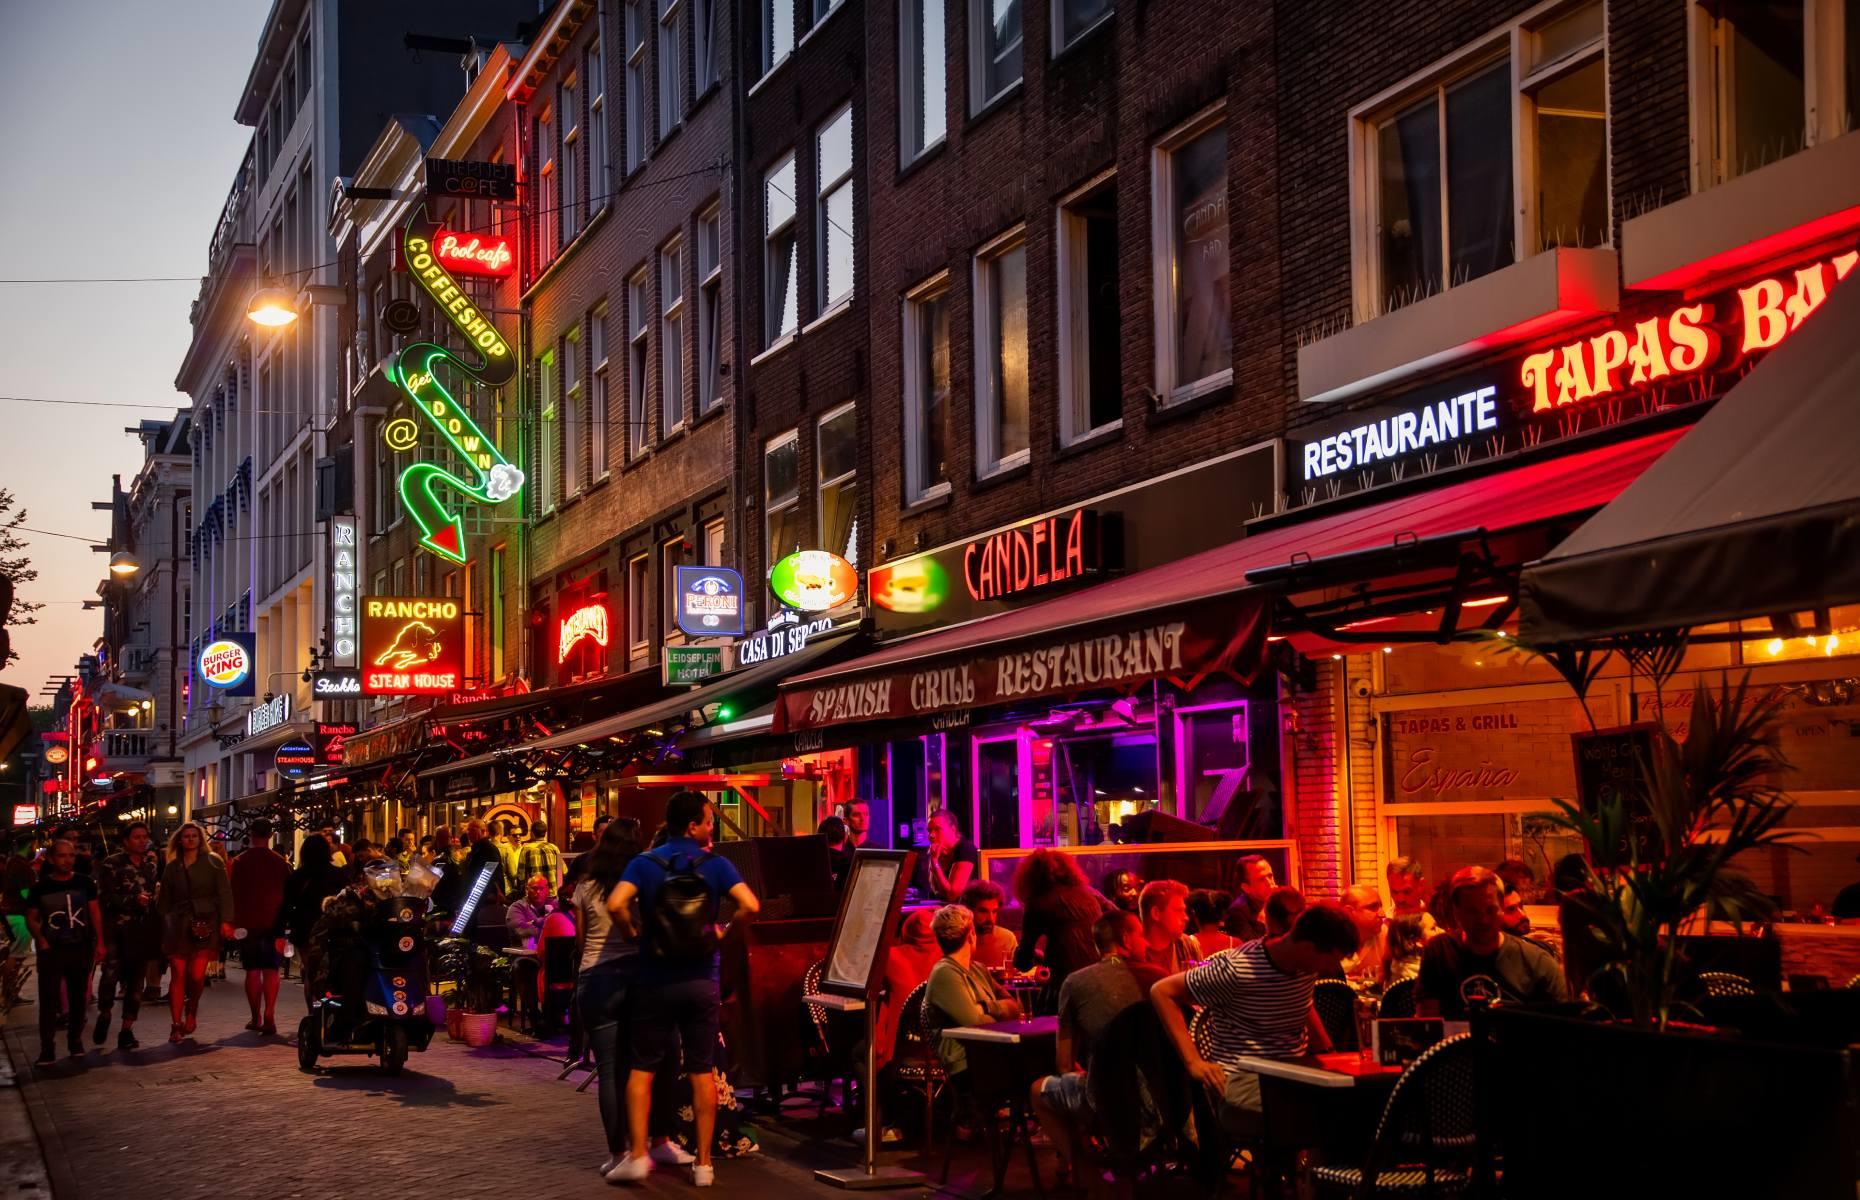 <p>Overtourism has become a major blight in some of Europe’s cities, whose fatal flaw is their aesthetic beauty and party-loving nightlife districts. But enough is enough, says Amsterdam, which will increase its tourist tax in 2024 in line with restrictions the city recently placed on cruise ships.</p>  <p>The hike will mean Amsterdam breaking its own record for the highest tourist tax in Europe – maybe even the world. Spanish destinations like Seville, Mallorca, and Barcelona are also clamping down on rowdy visitors eliciting antisocial behavior.</p>